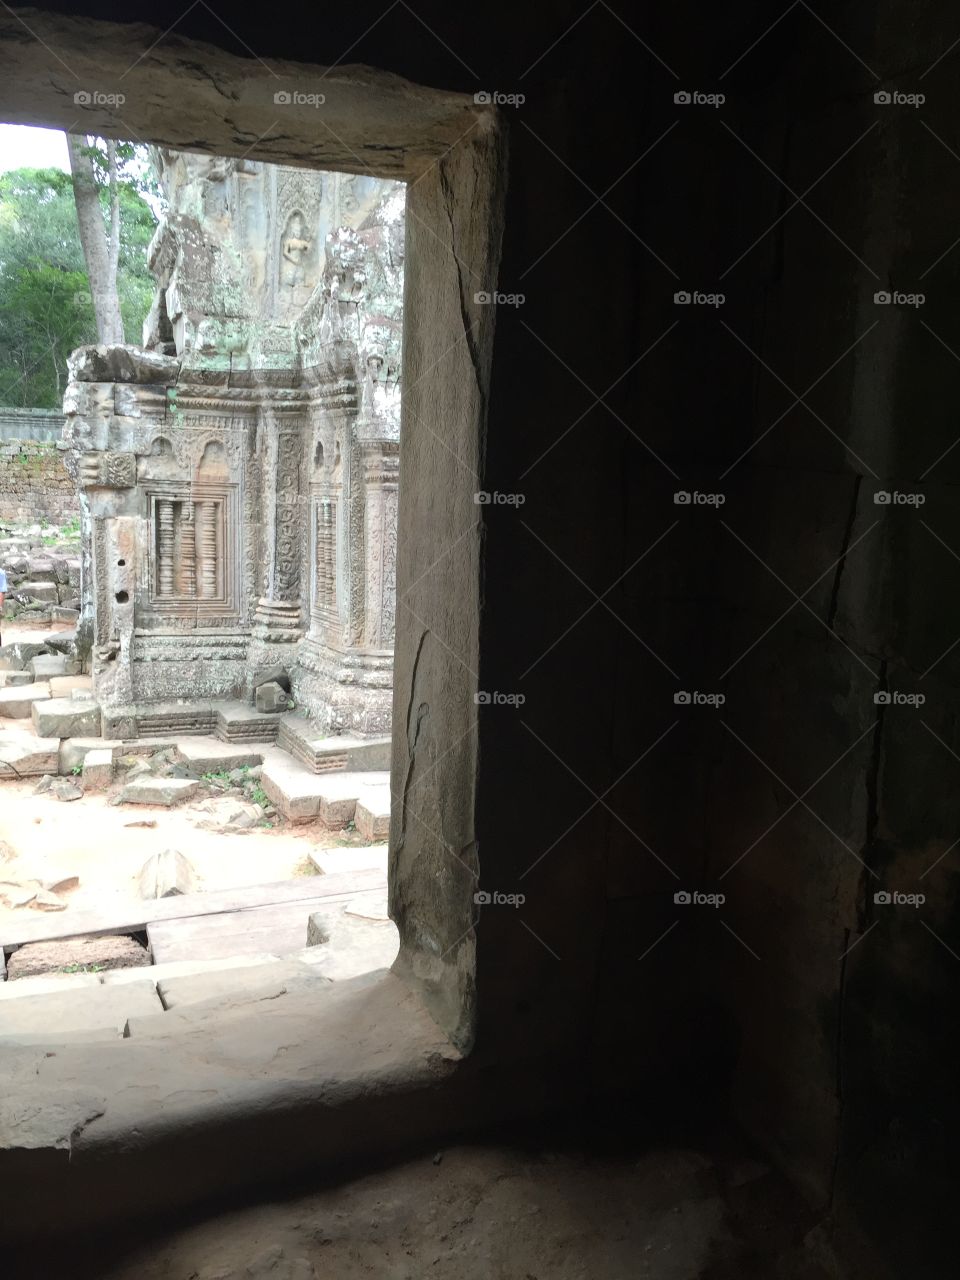 View of ruin temple entrance